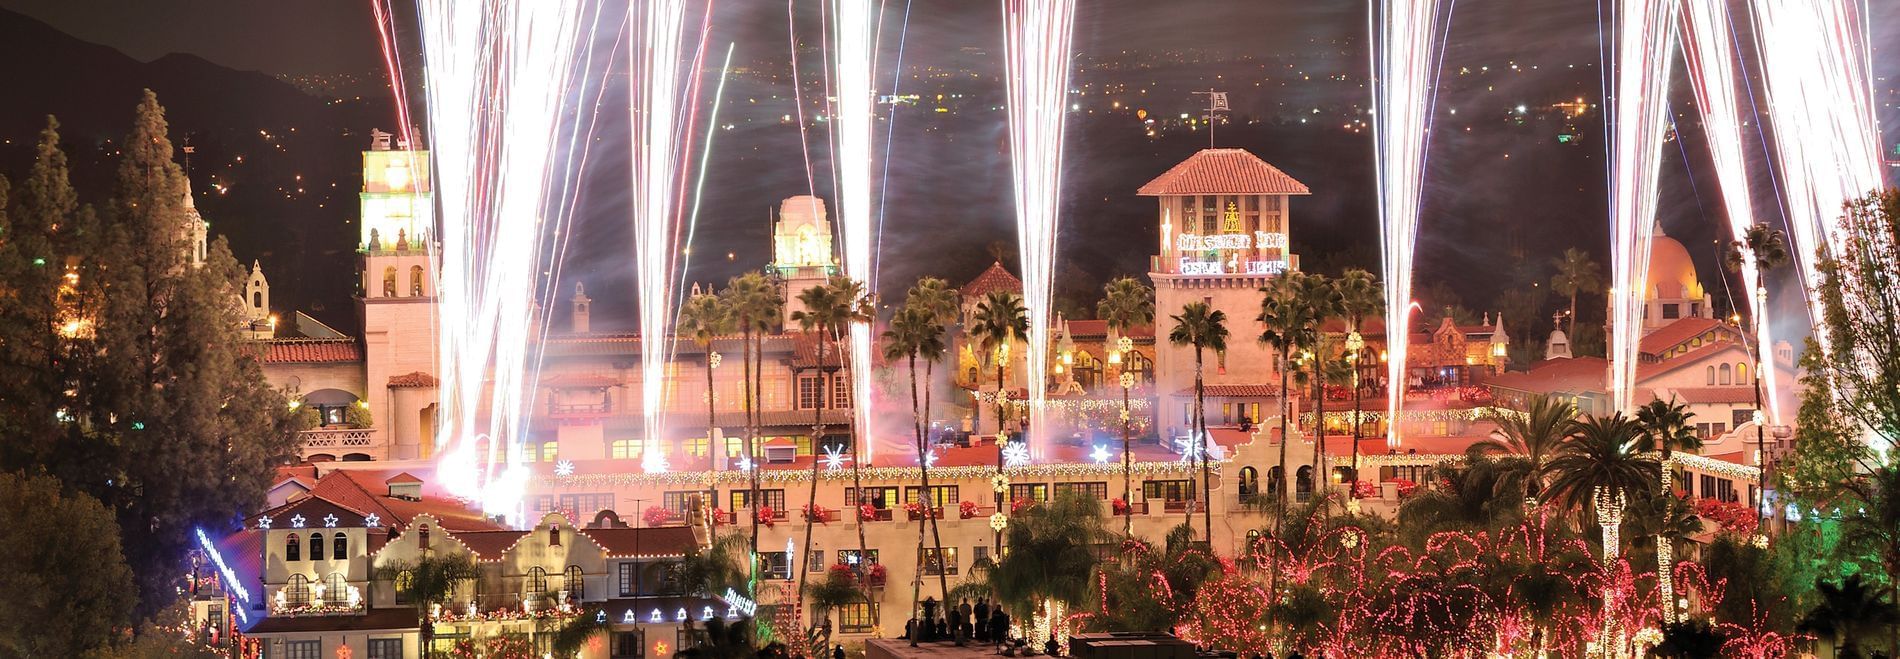 Fireworks at an event in the night at Mission Inn Riverside